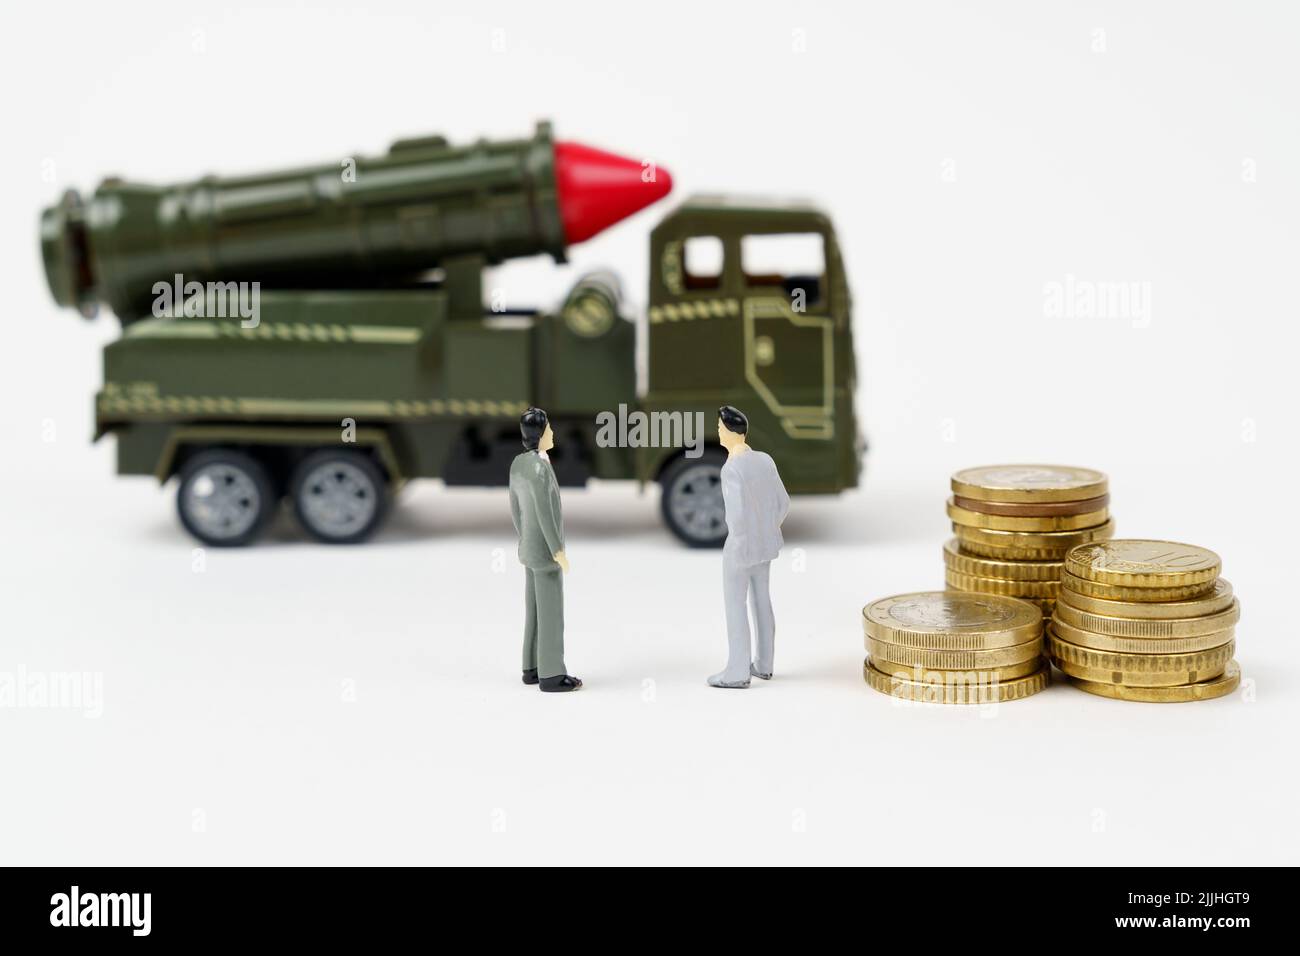 The concept of the military budget. On a white surface are figurines of people, coins and a toy military vehicle. Stock Photo